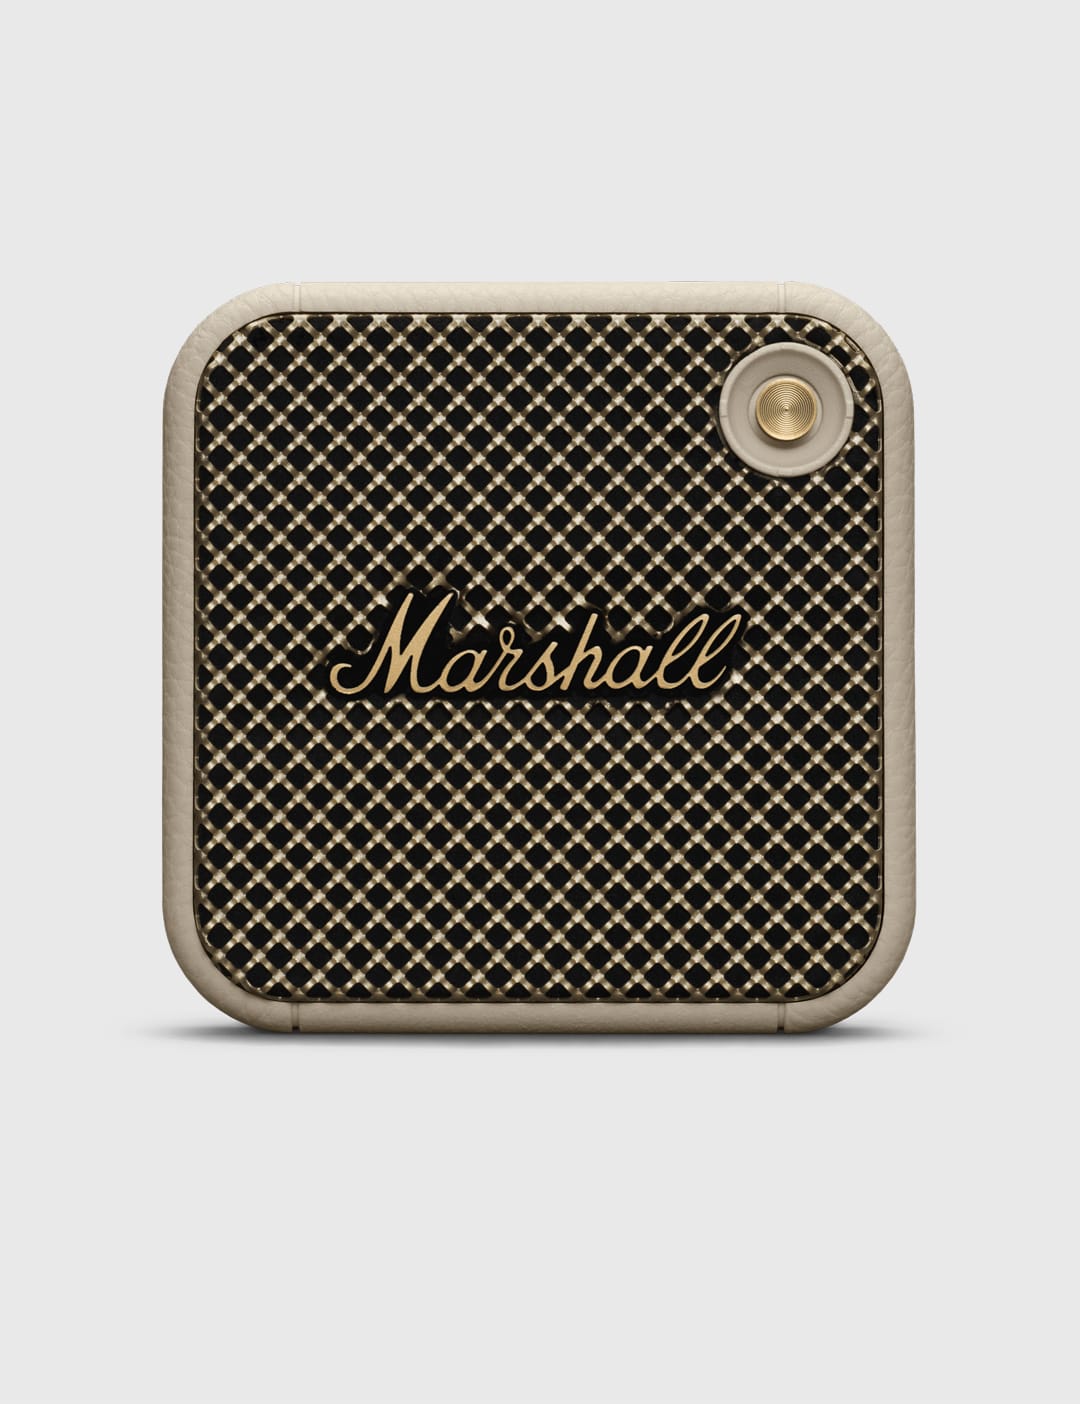 Marshall - Willen Speaker | HBX - Globally Curated Fashion and